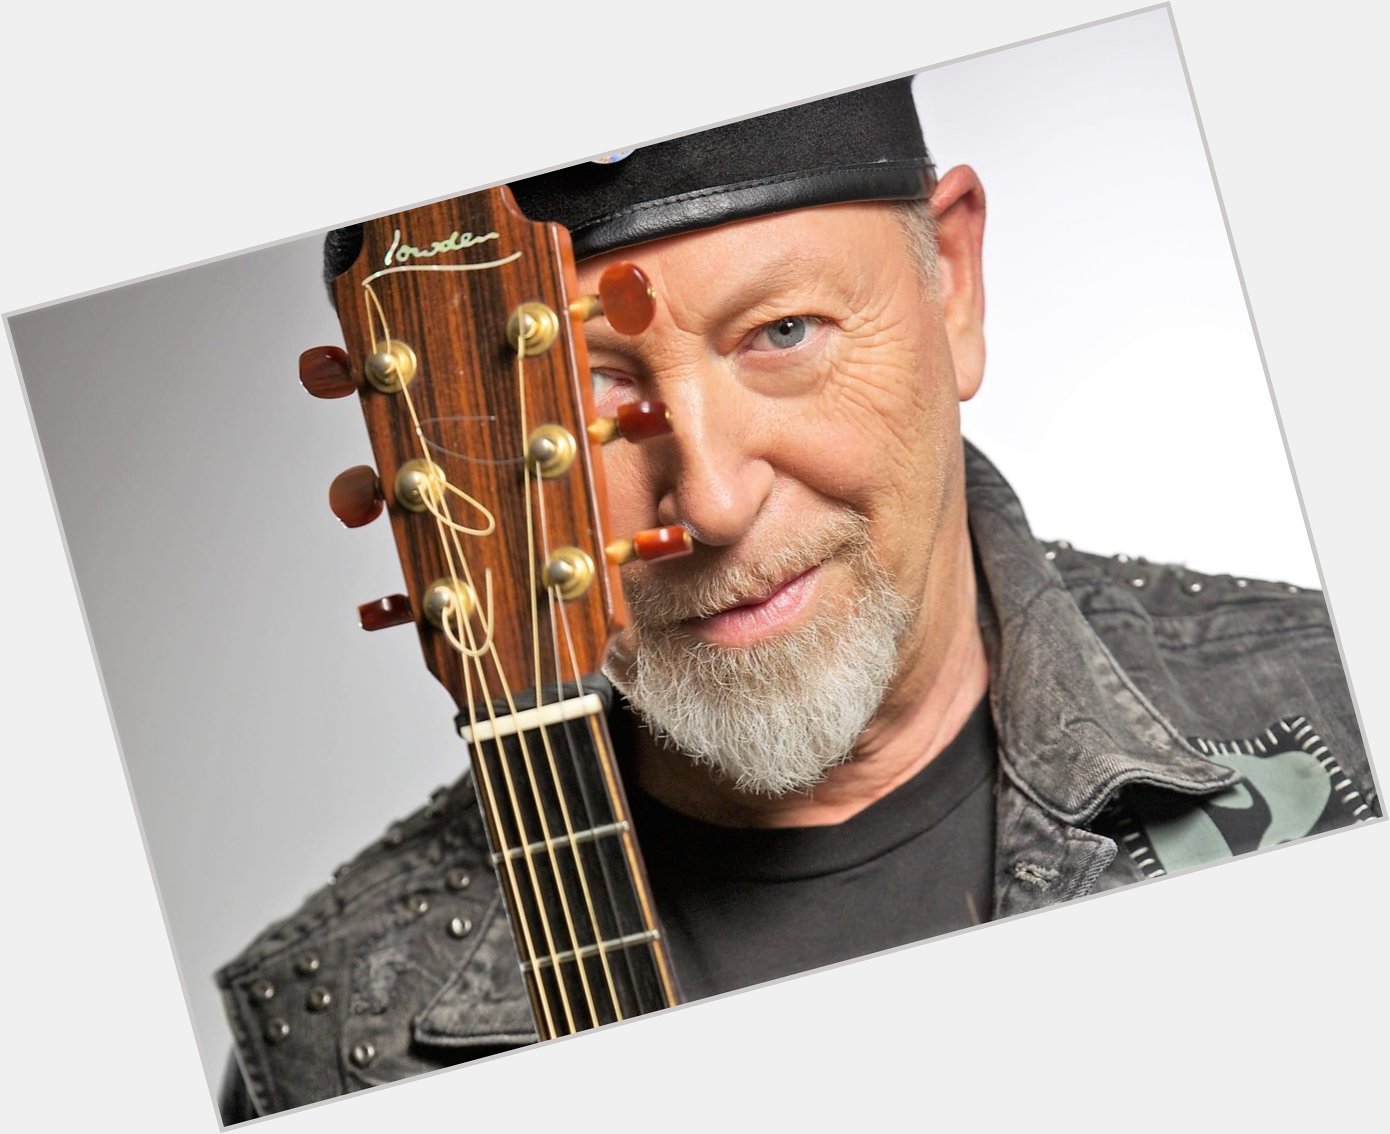     Wishing a very happy 72nd birthday to the ever-brilliant Richard Thompson!   